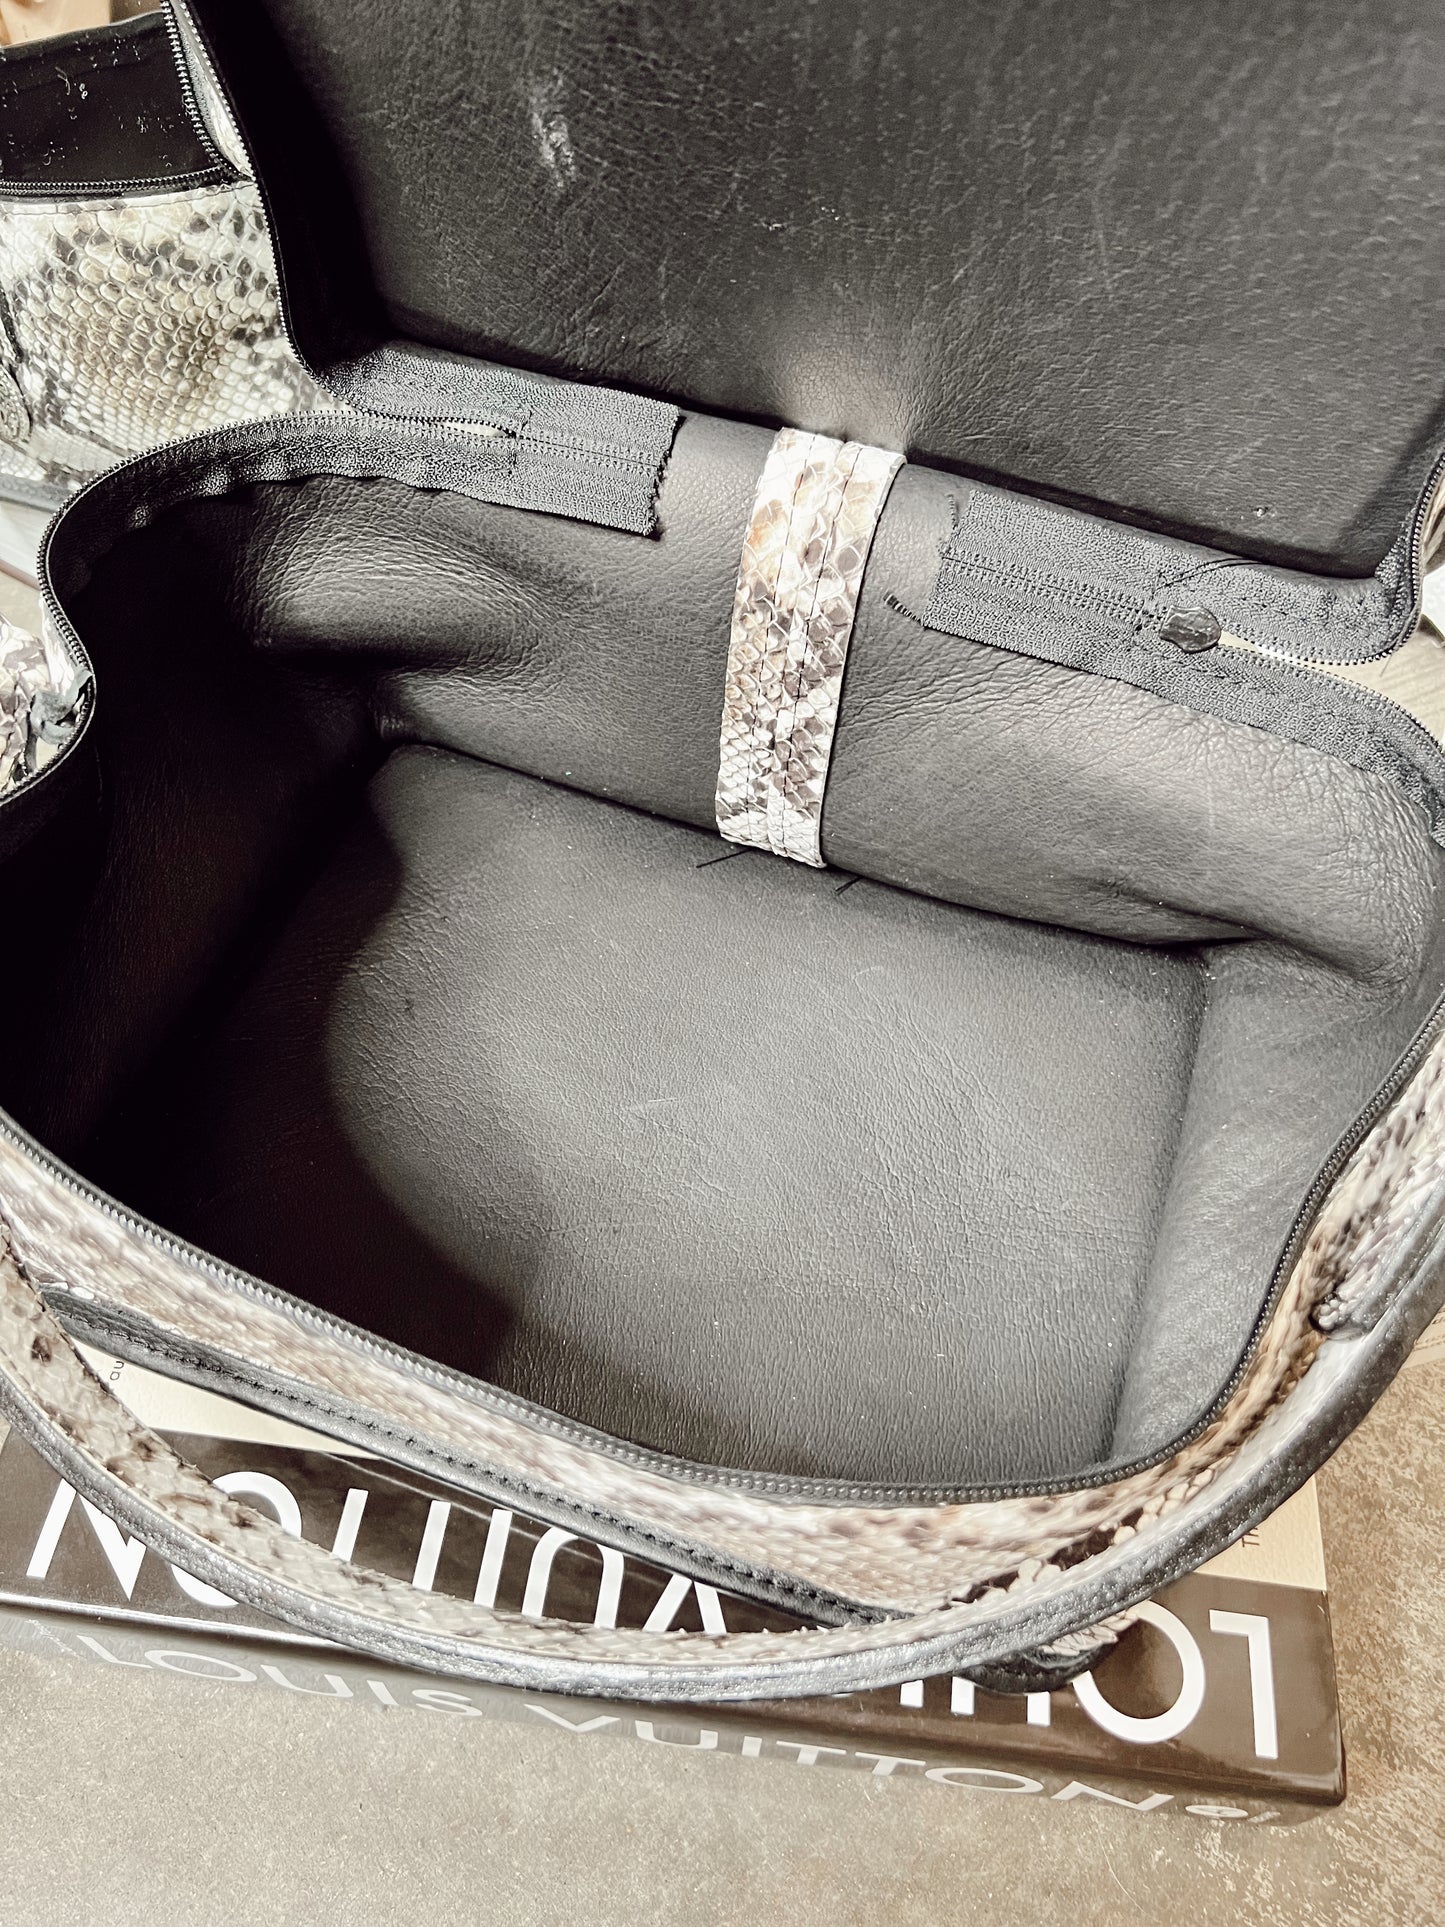 The Double J White Gator Makeup Tote